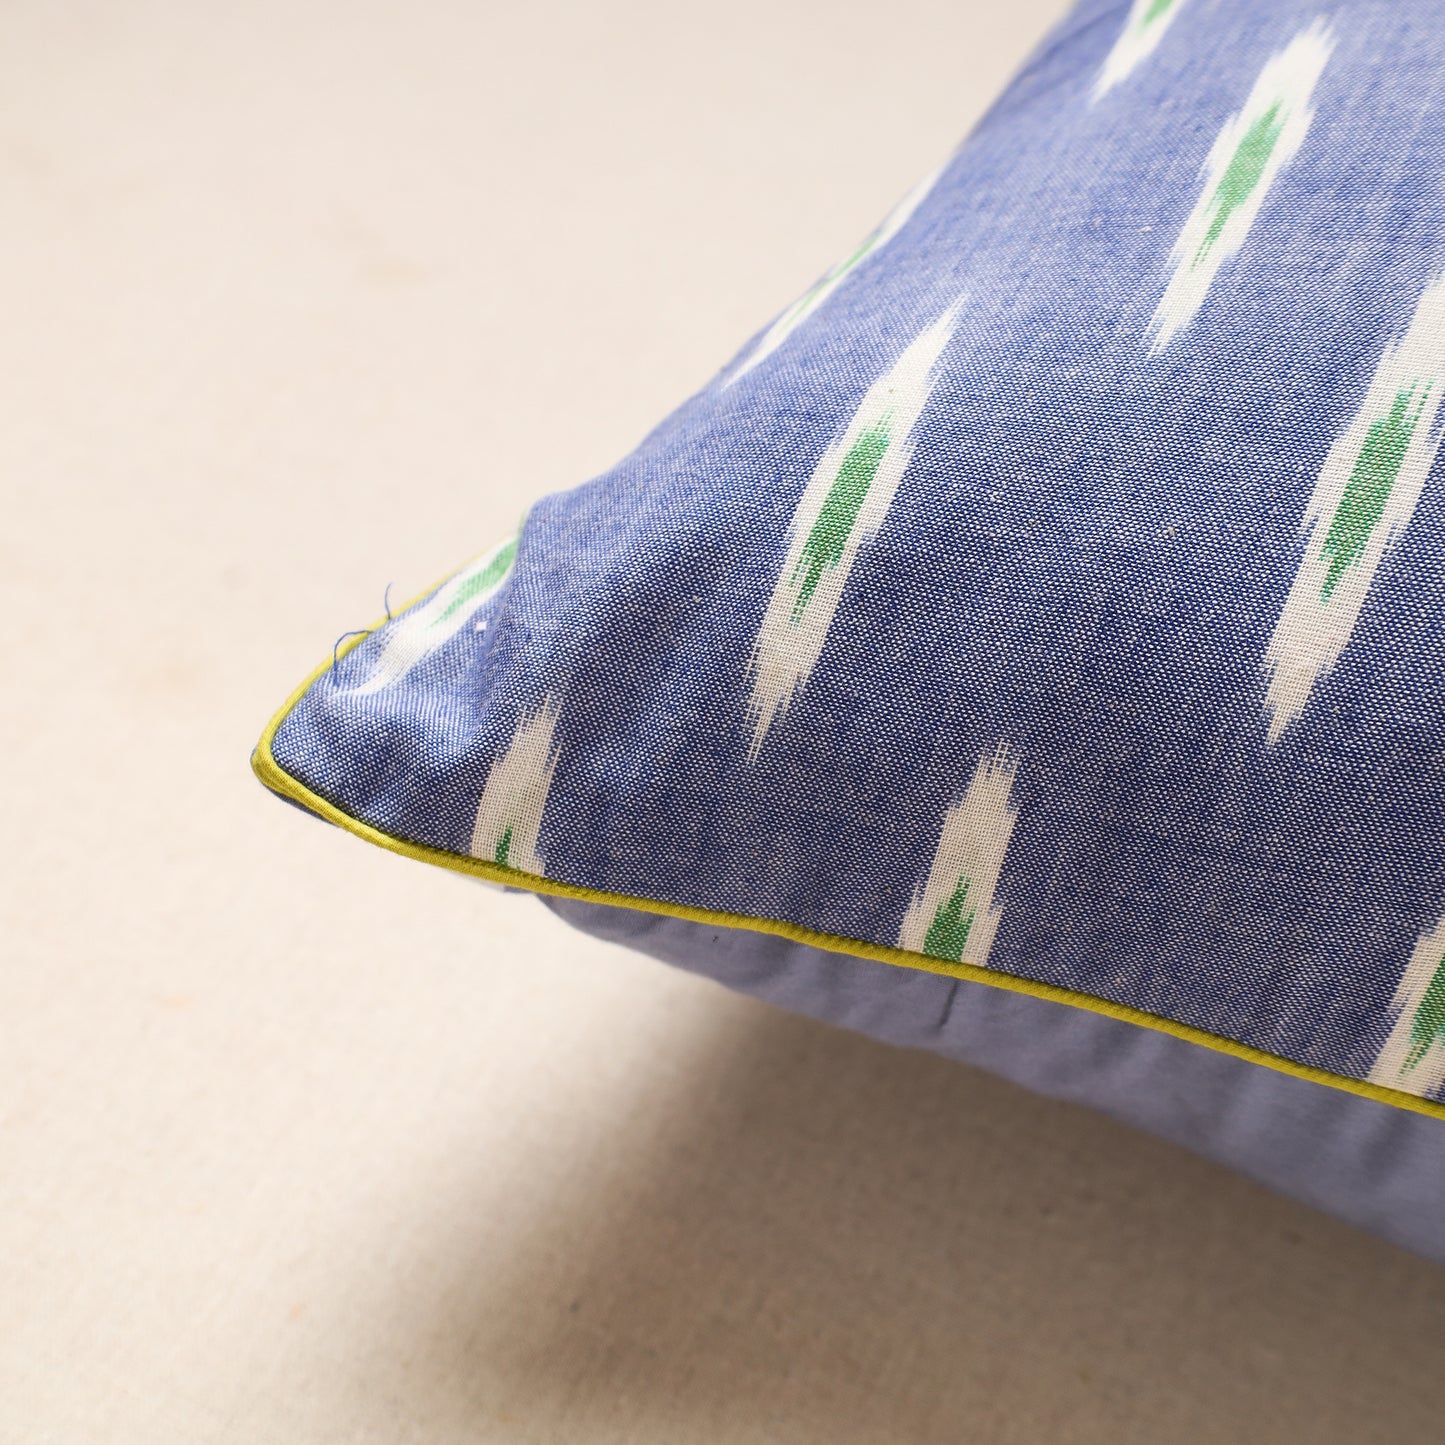 Ikat Cotton Cushion Cover 